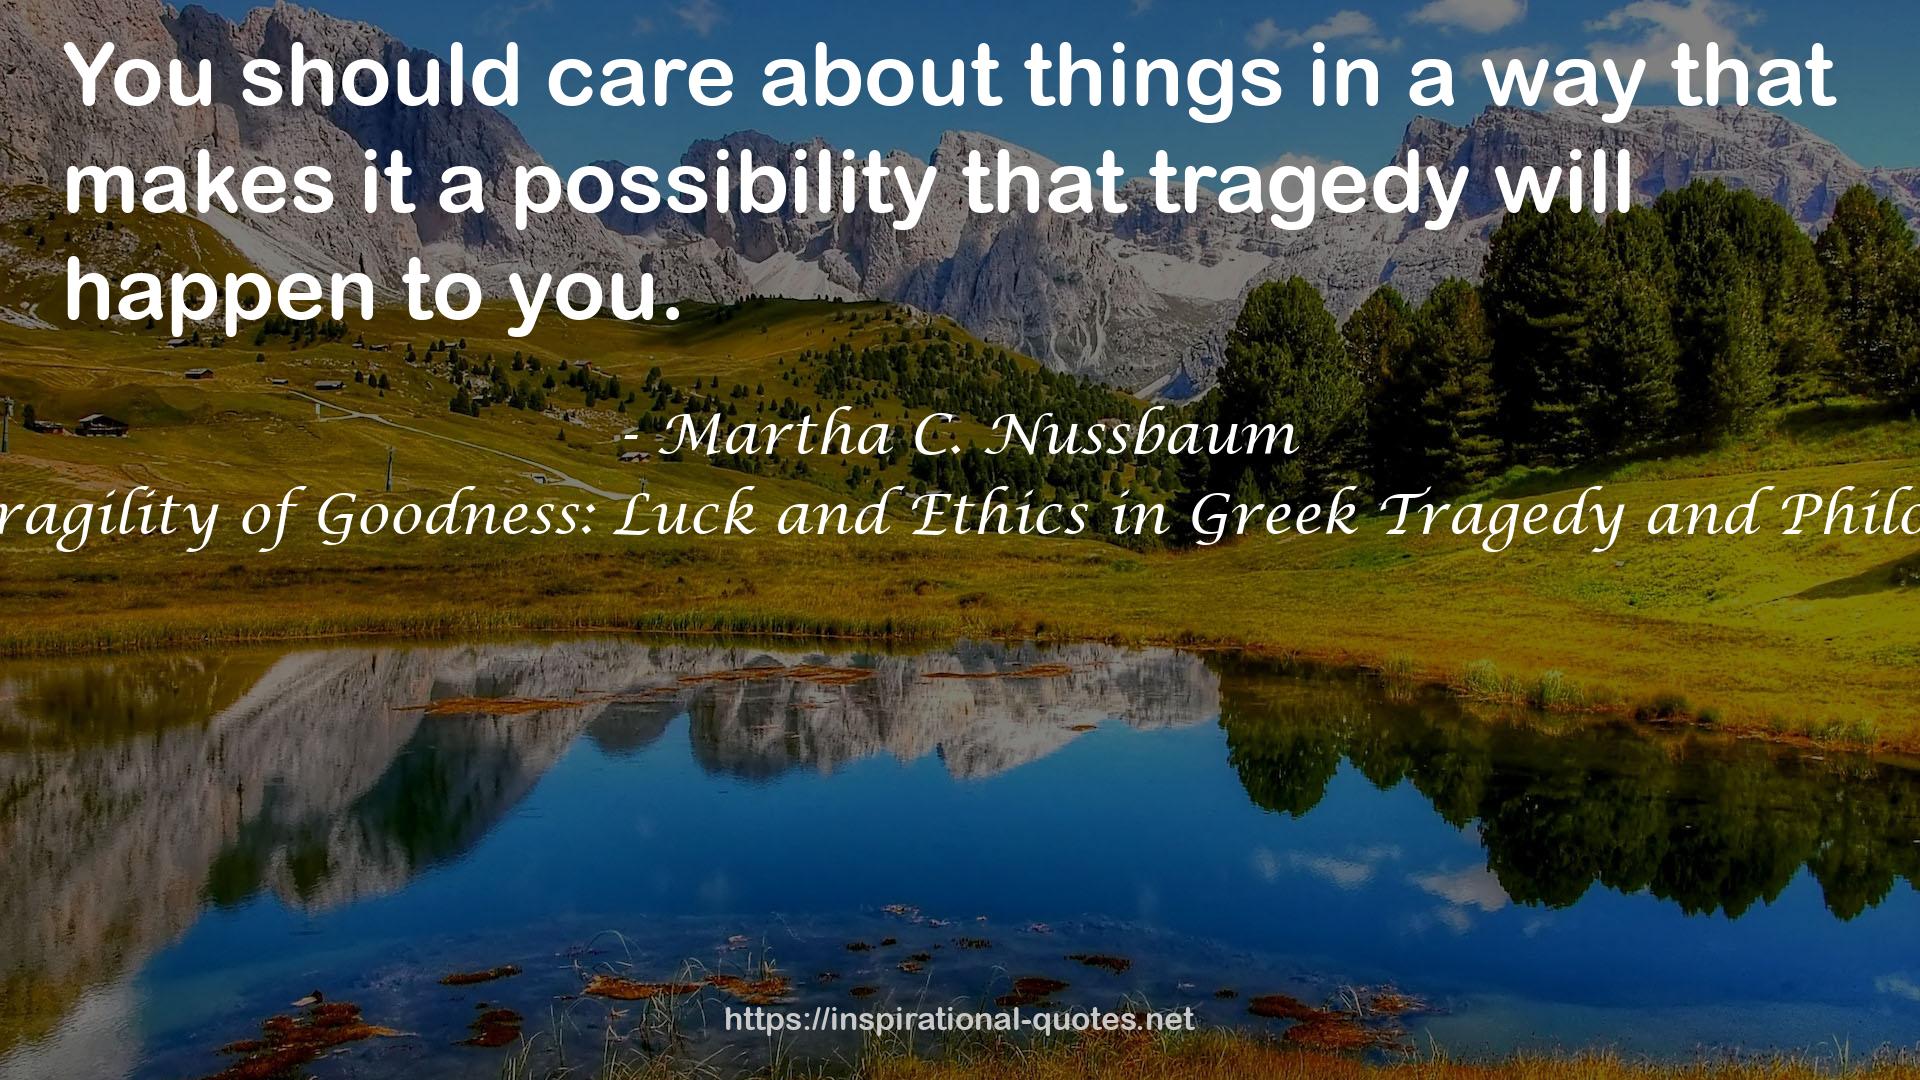 The Fragility of Goodness: Luck and Ethics in Greek Tragedy and Philosophy QUOTES